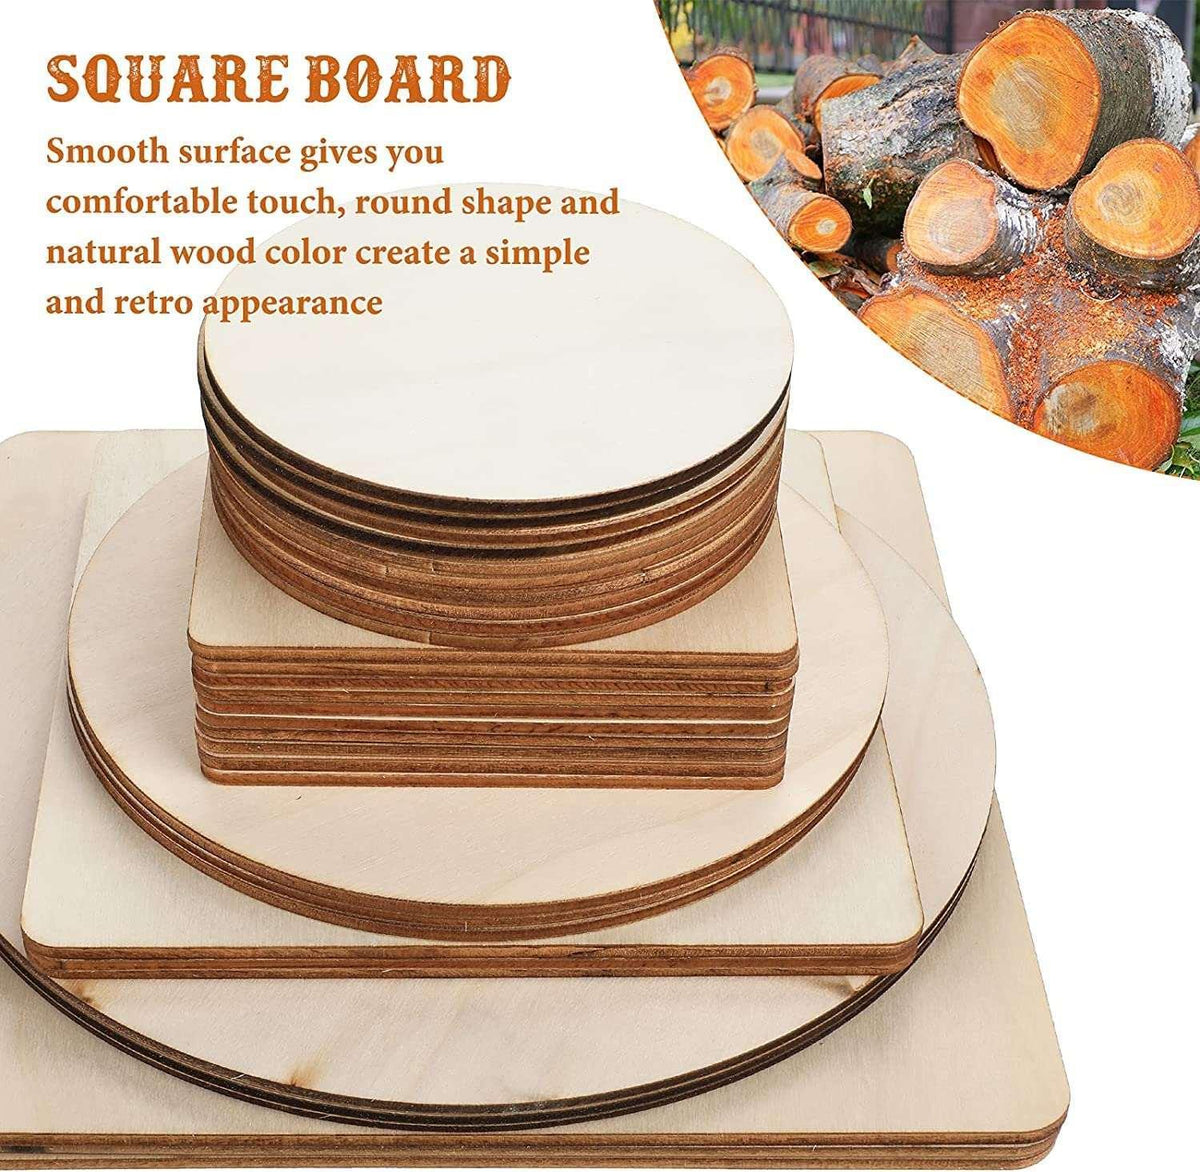 Haoser 18 Pieces Unfinished Blank Wood Pieces Wooden Squares for Crafts Natural Wooden Cutouts Tiles Round Wood Circles